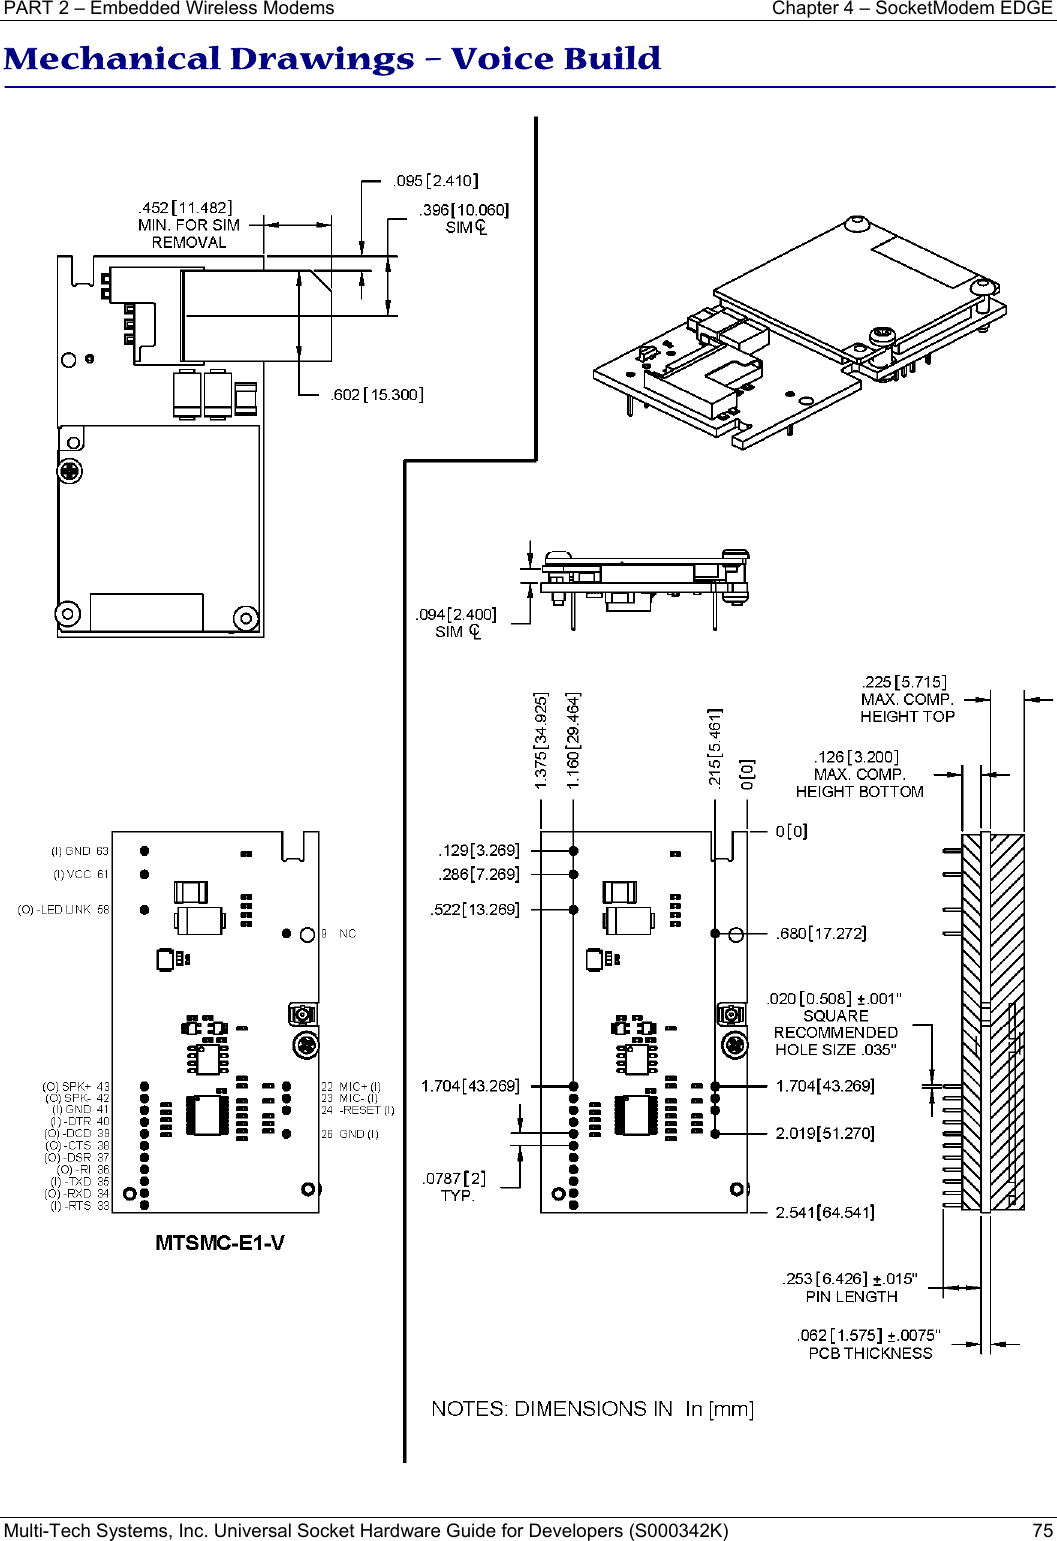 PART 2 – Embedded Wireless Modems  Chapter 4 – SocketModem EDGE Multi-Tech Systems, Inc. Universal Socket Hardware Guide for Developers (S000342K)  75  Mechanical Drawings – Voice Build  